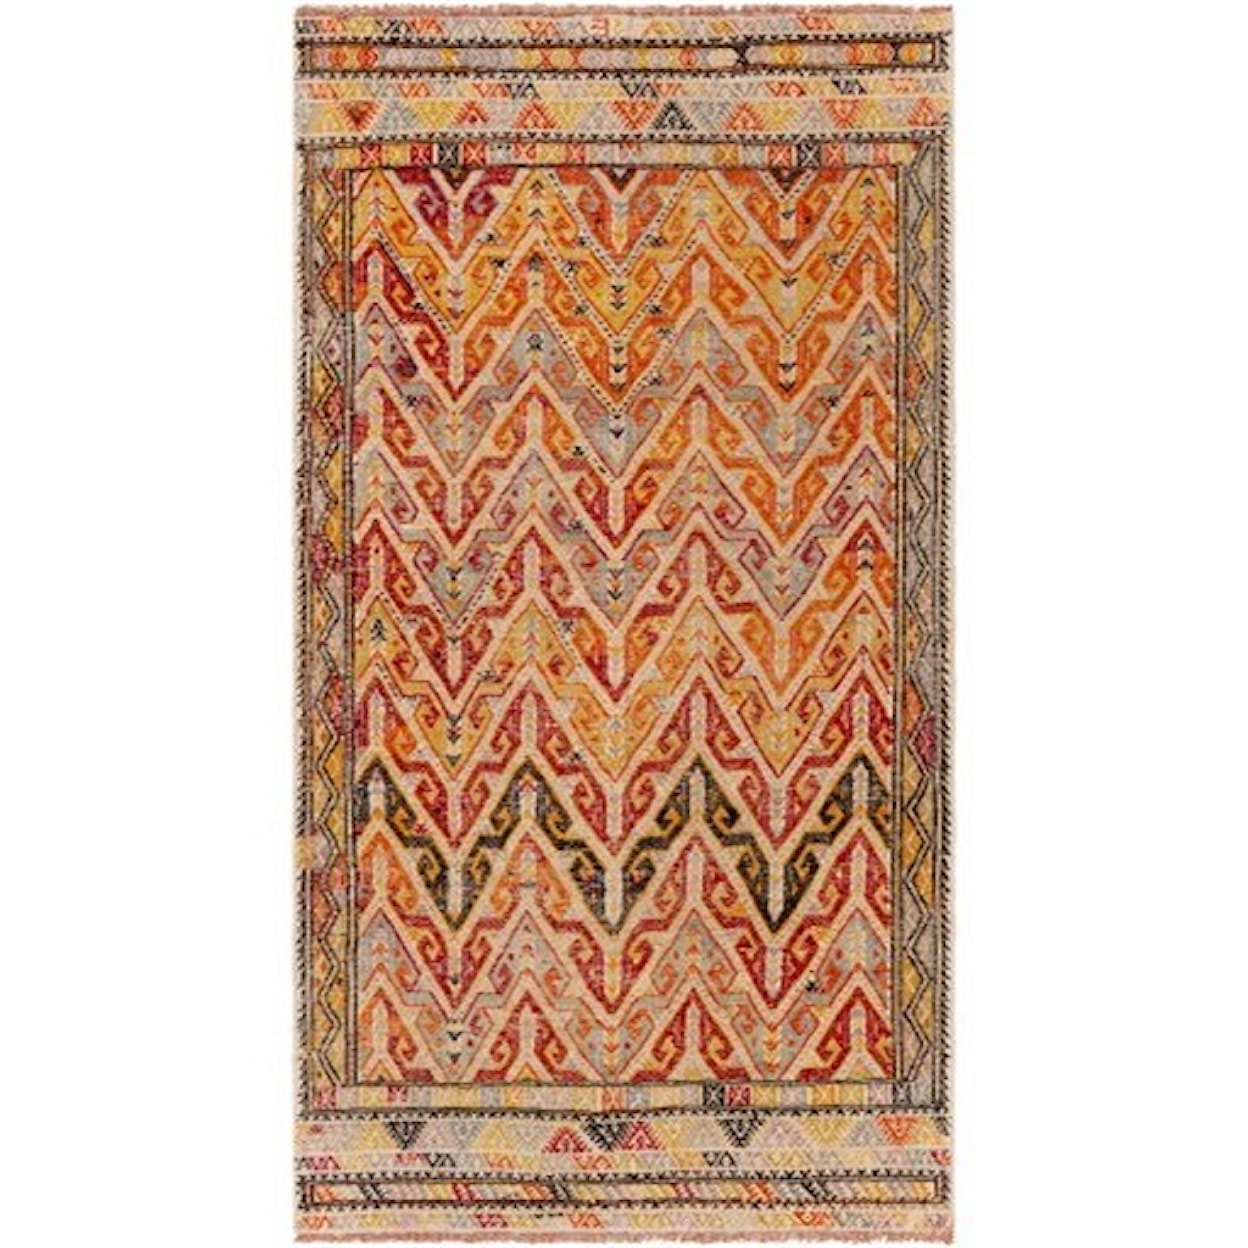 Ruby-Gordon Accents One of a Kind 5'2" x 9'3" Rug